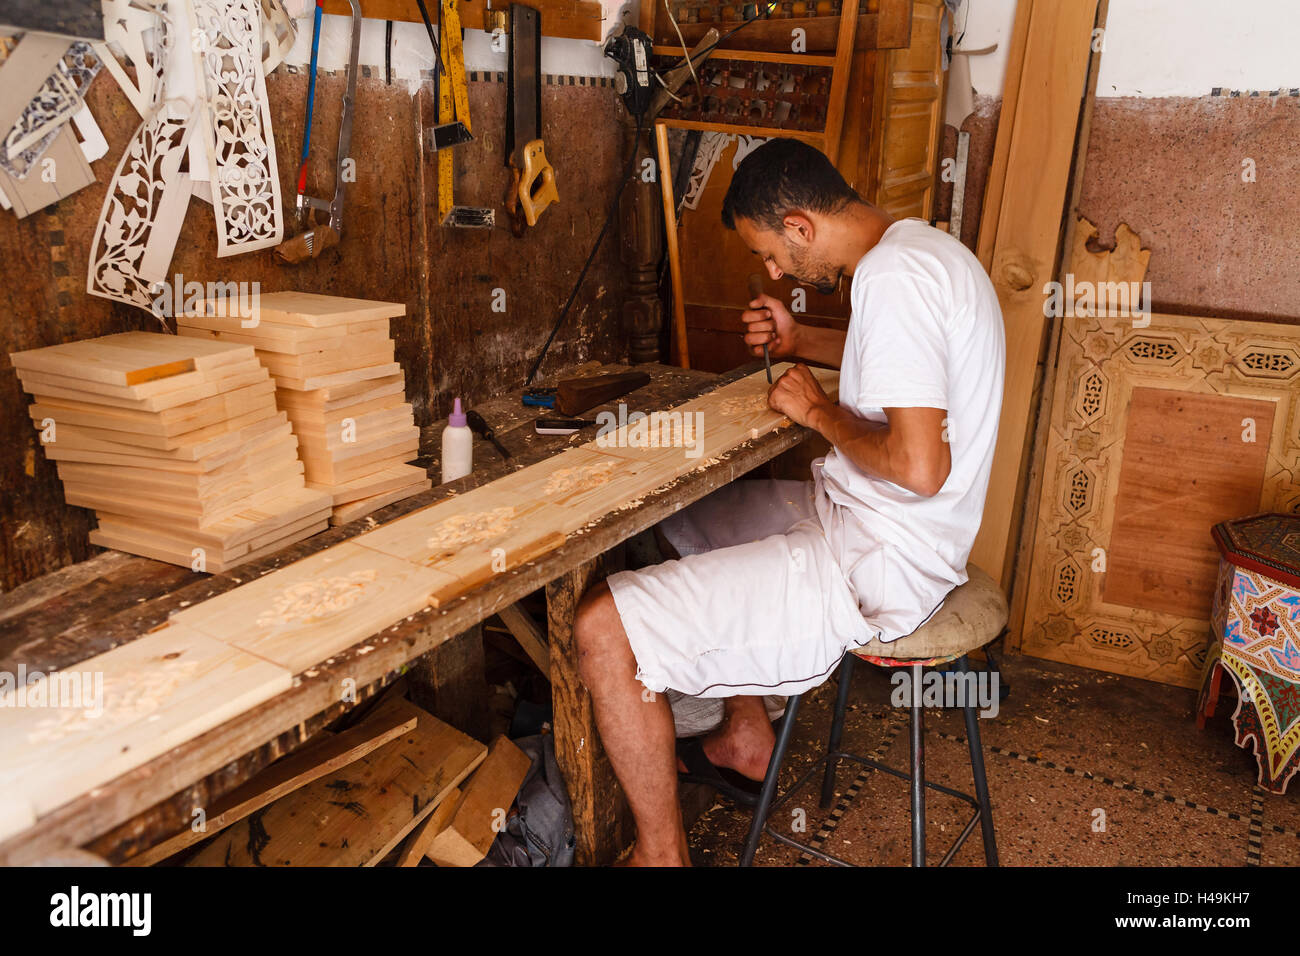 Manual production of wood products and souvenirs in Morocco. Stock Photo